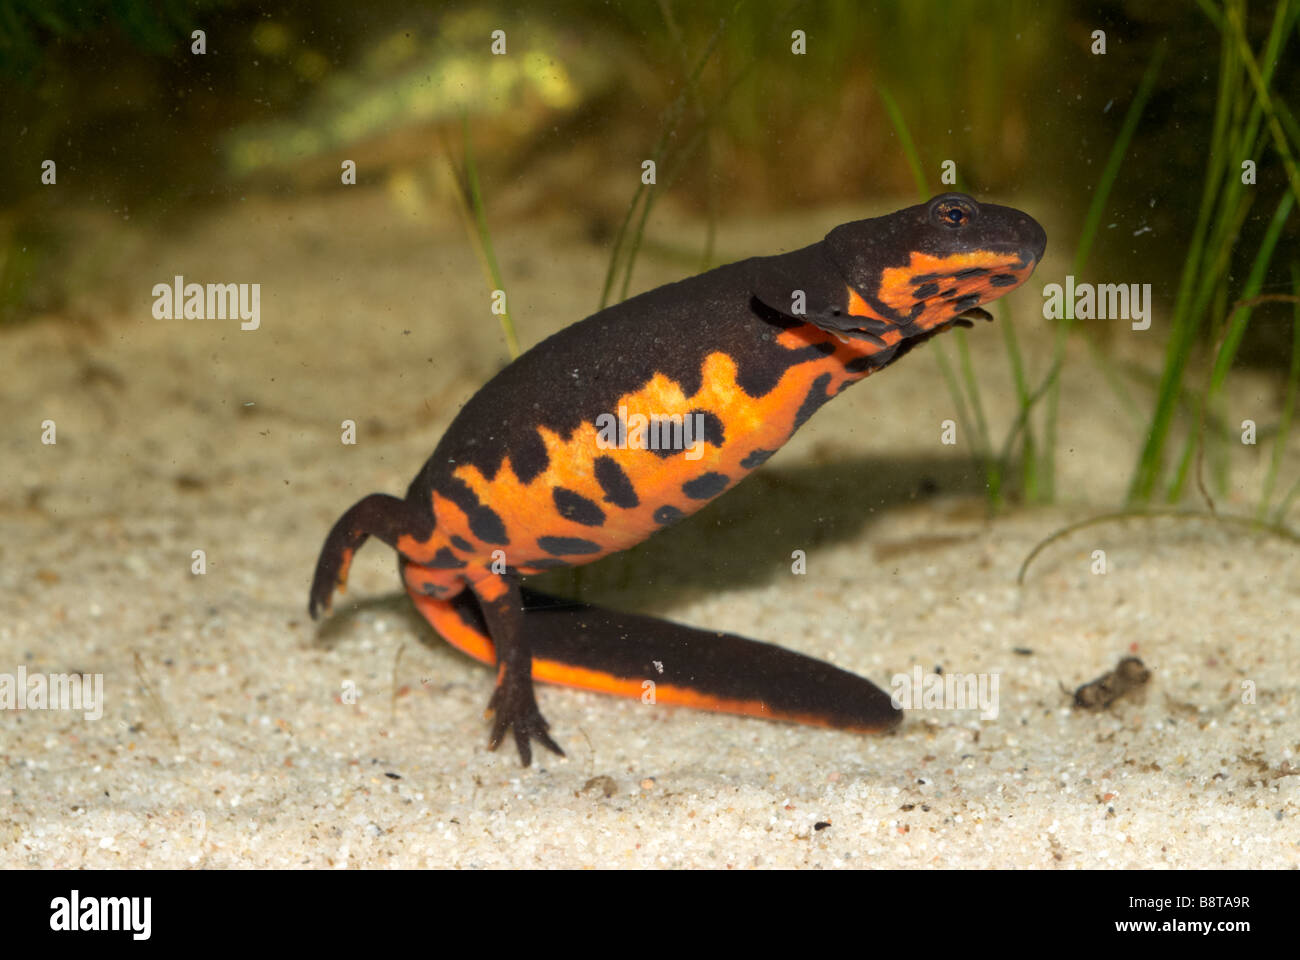 CYNOPS ORIENTALIS CHINESE FIRE BELLIED NEWT Stock Photo